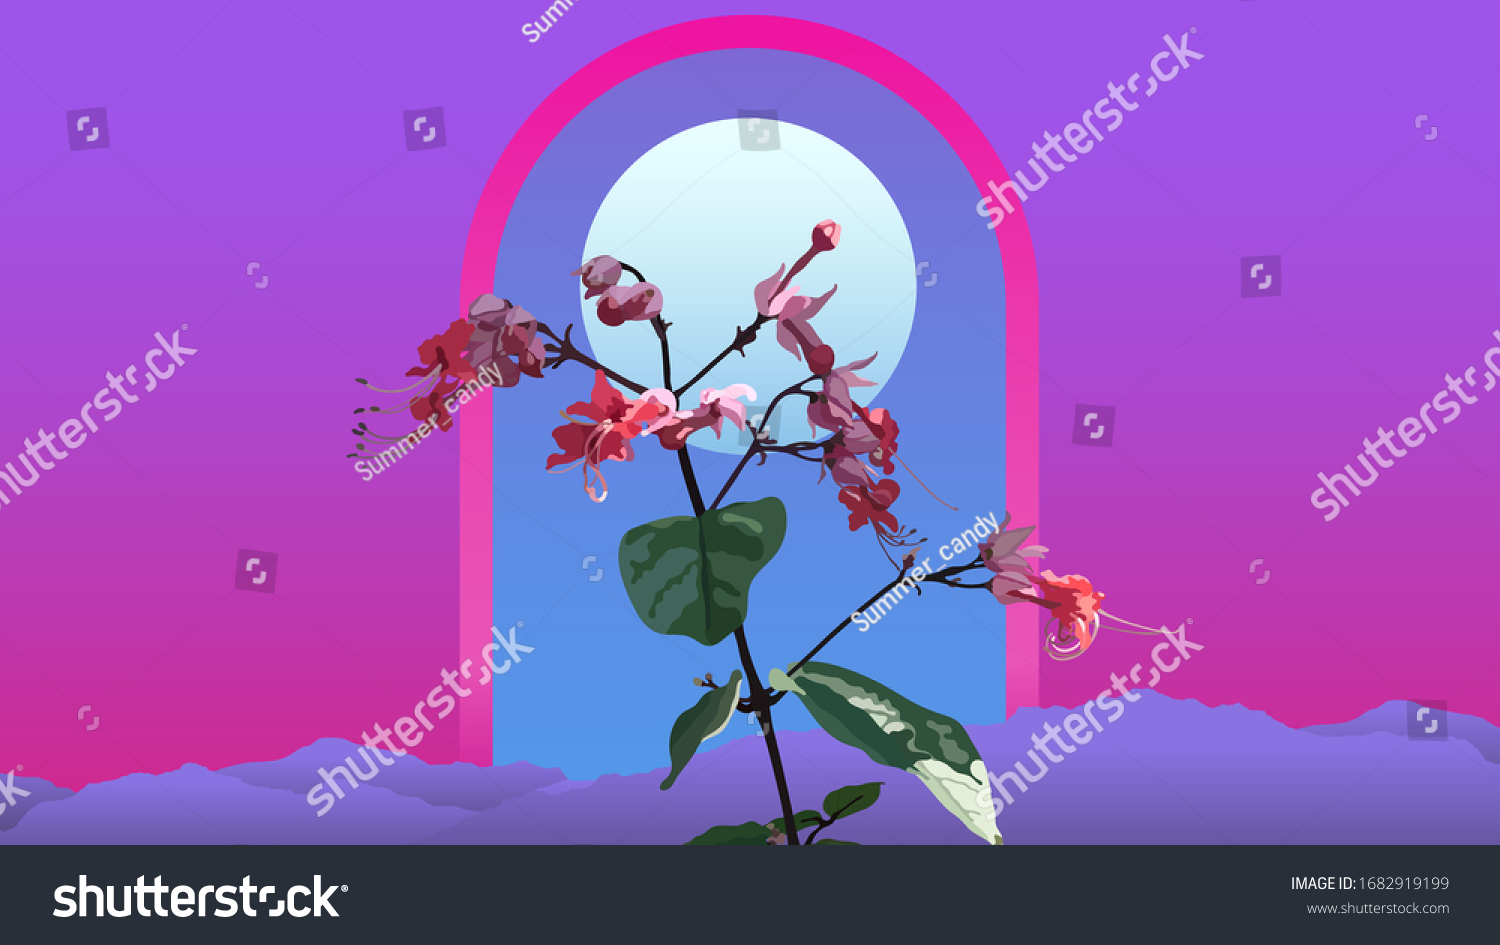 Aesthetic Tropical Flowers On Arch Door Stock Vector Royalty Free 1682919199